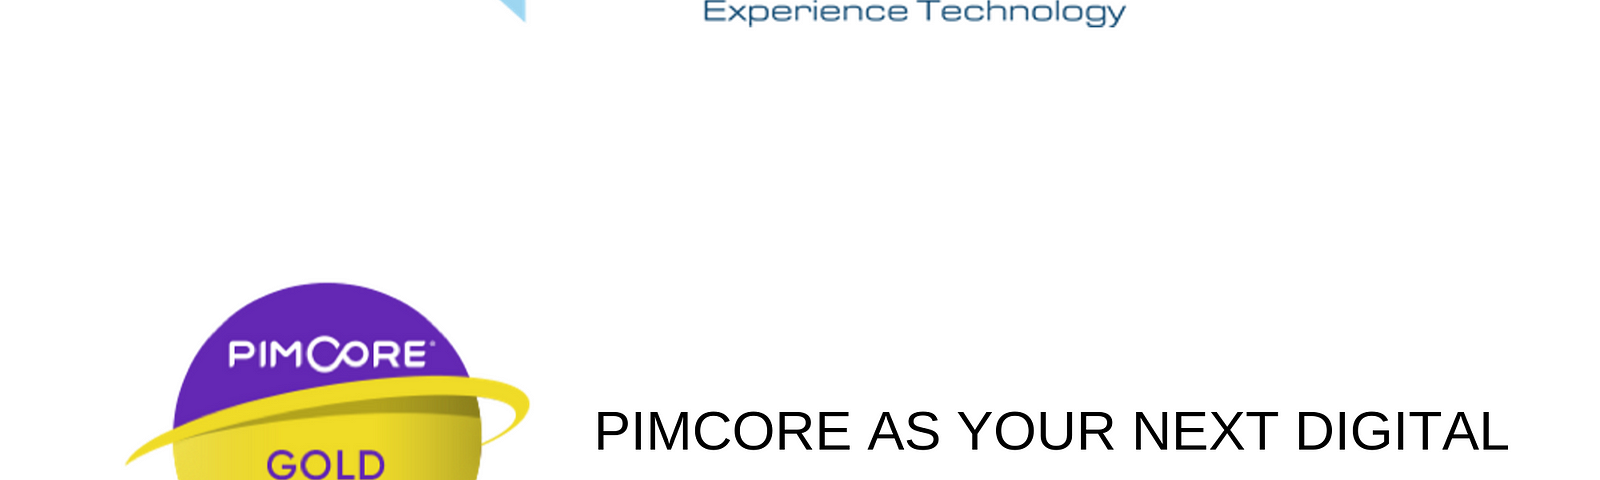 Are You Looking for Your Next Pimcore Digital Experience Platform?